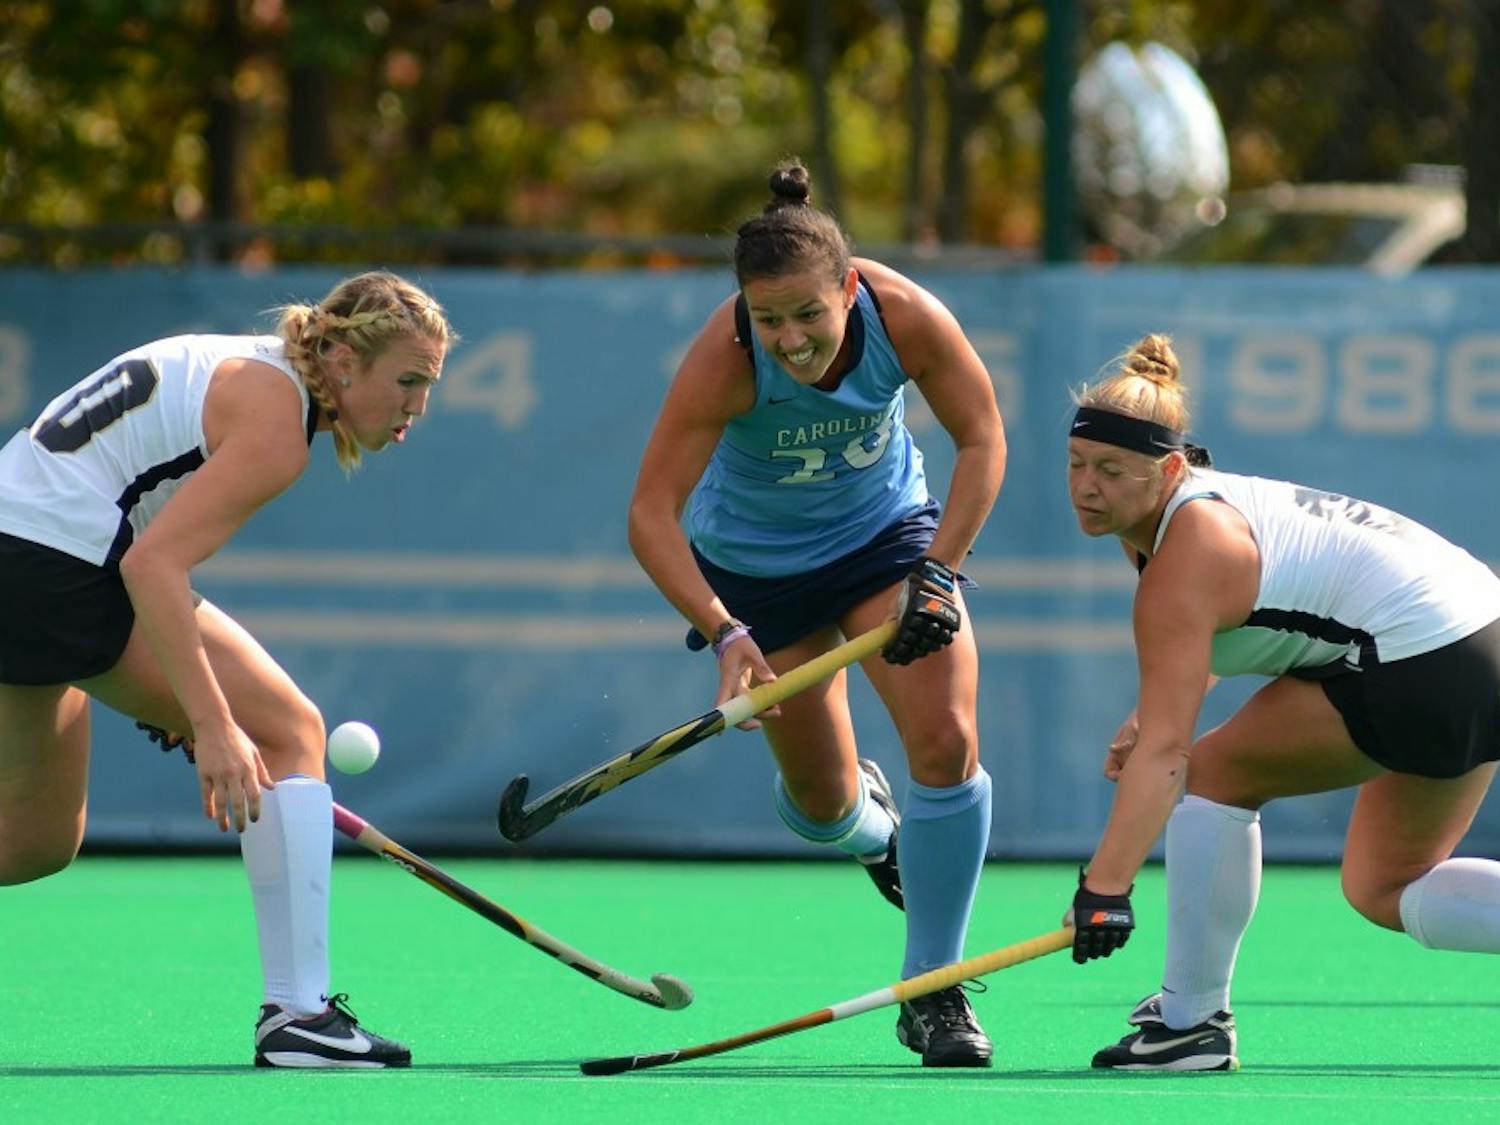 	#1 UNC Field Hockey defeated Wake Forest 4-0 in the Semi-Finals of the 2012 ACC Tournament on November 2nd, 2012 at Henry Stadium in Chapel Hill, North Carolina. Carolina will play in the Championship game on Sunday November 4th at 1 p.m.